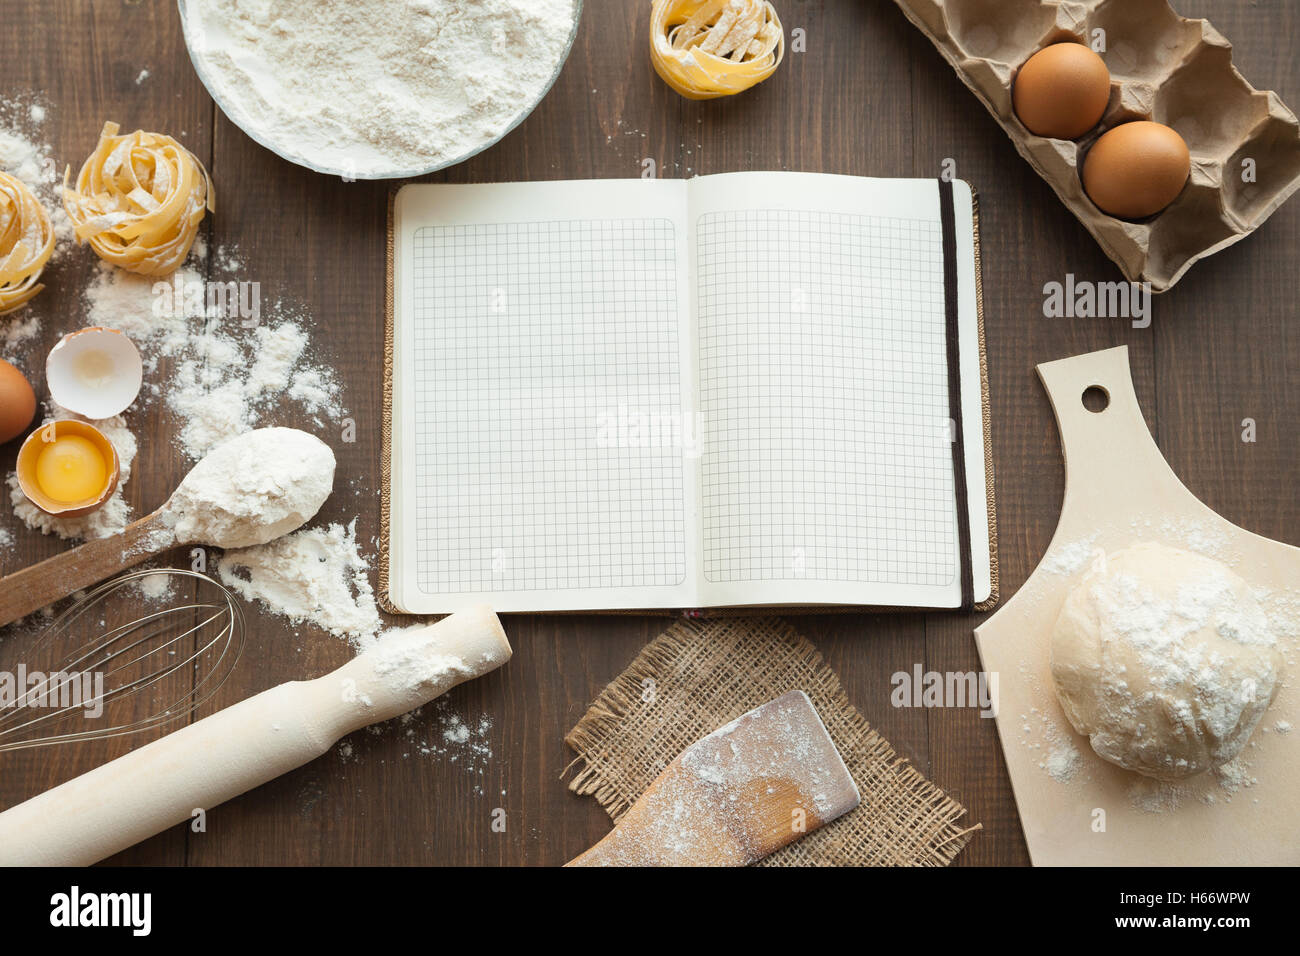 Delicious cuisine view from above. Stock Photo